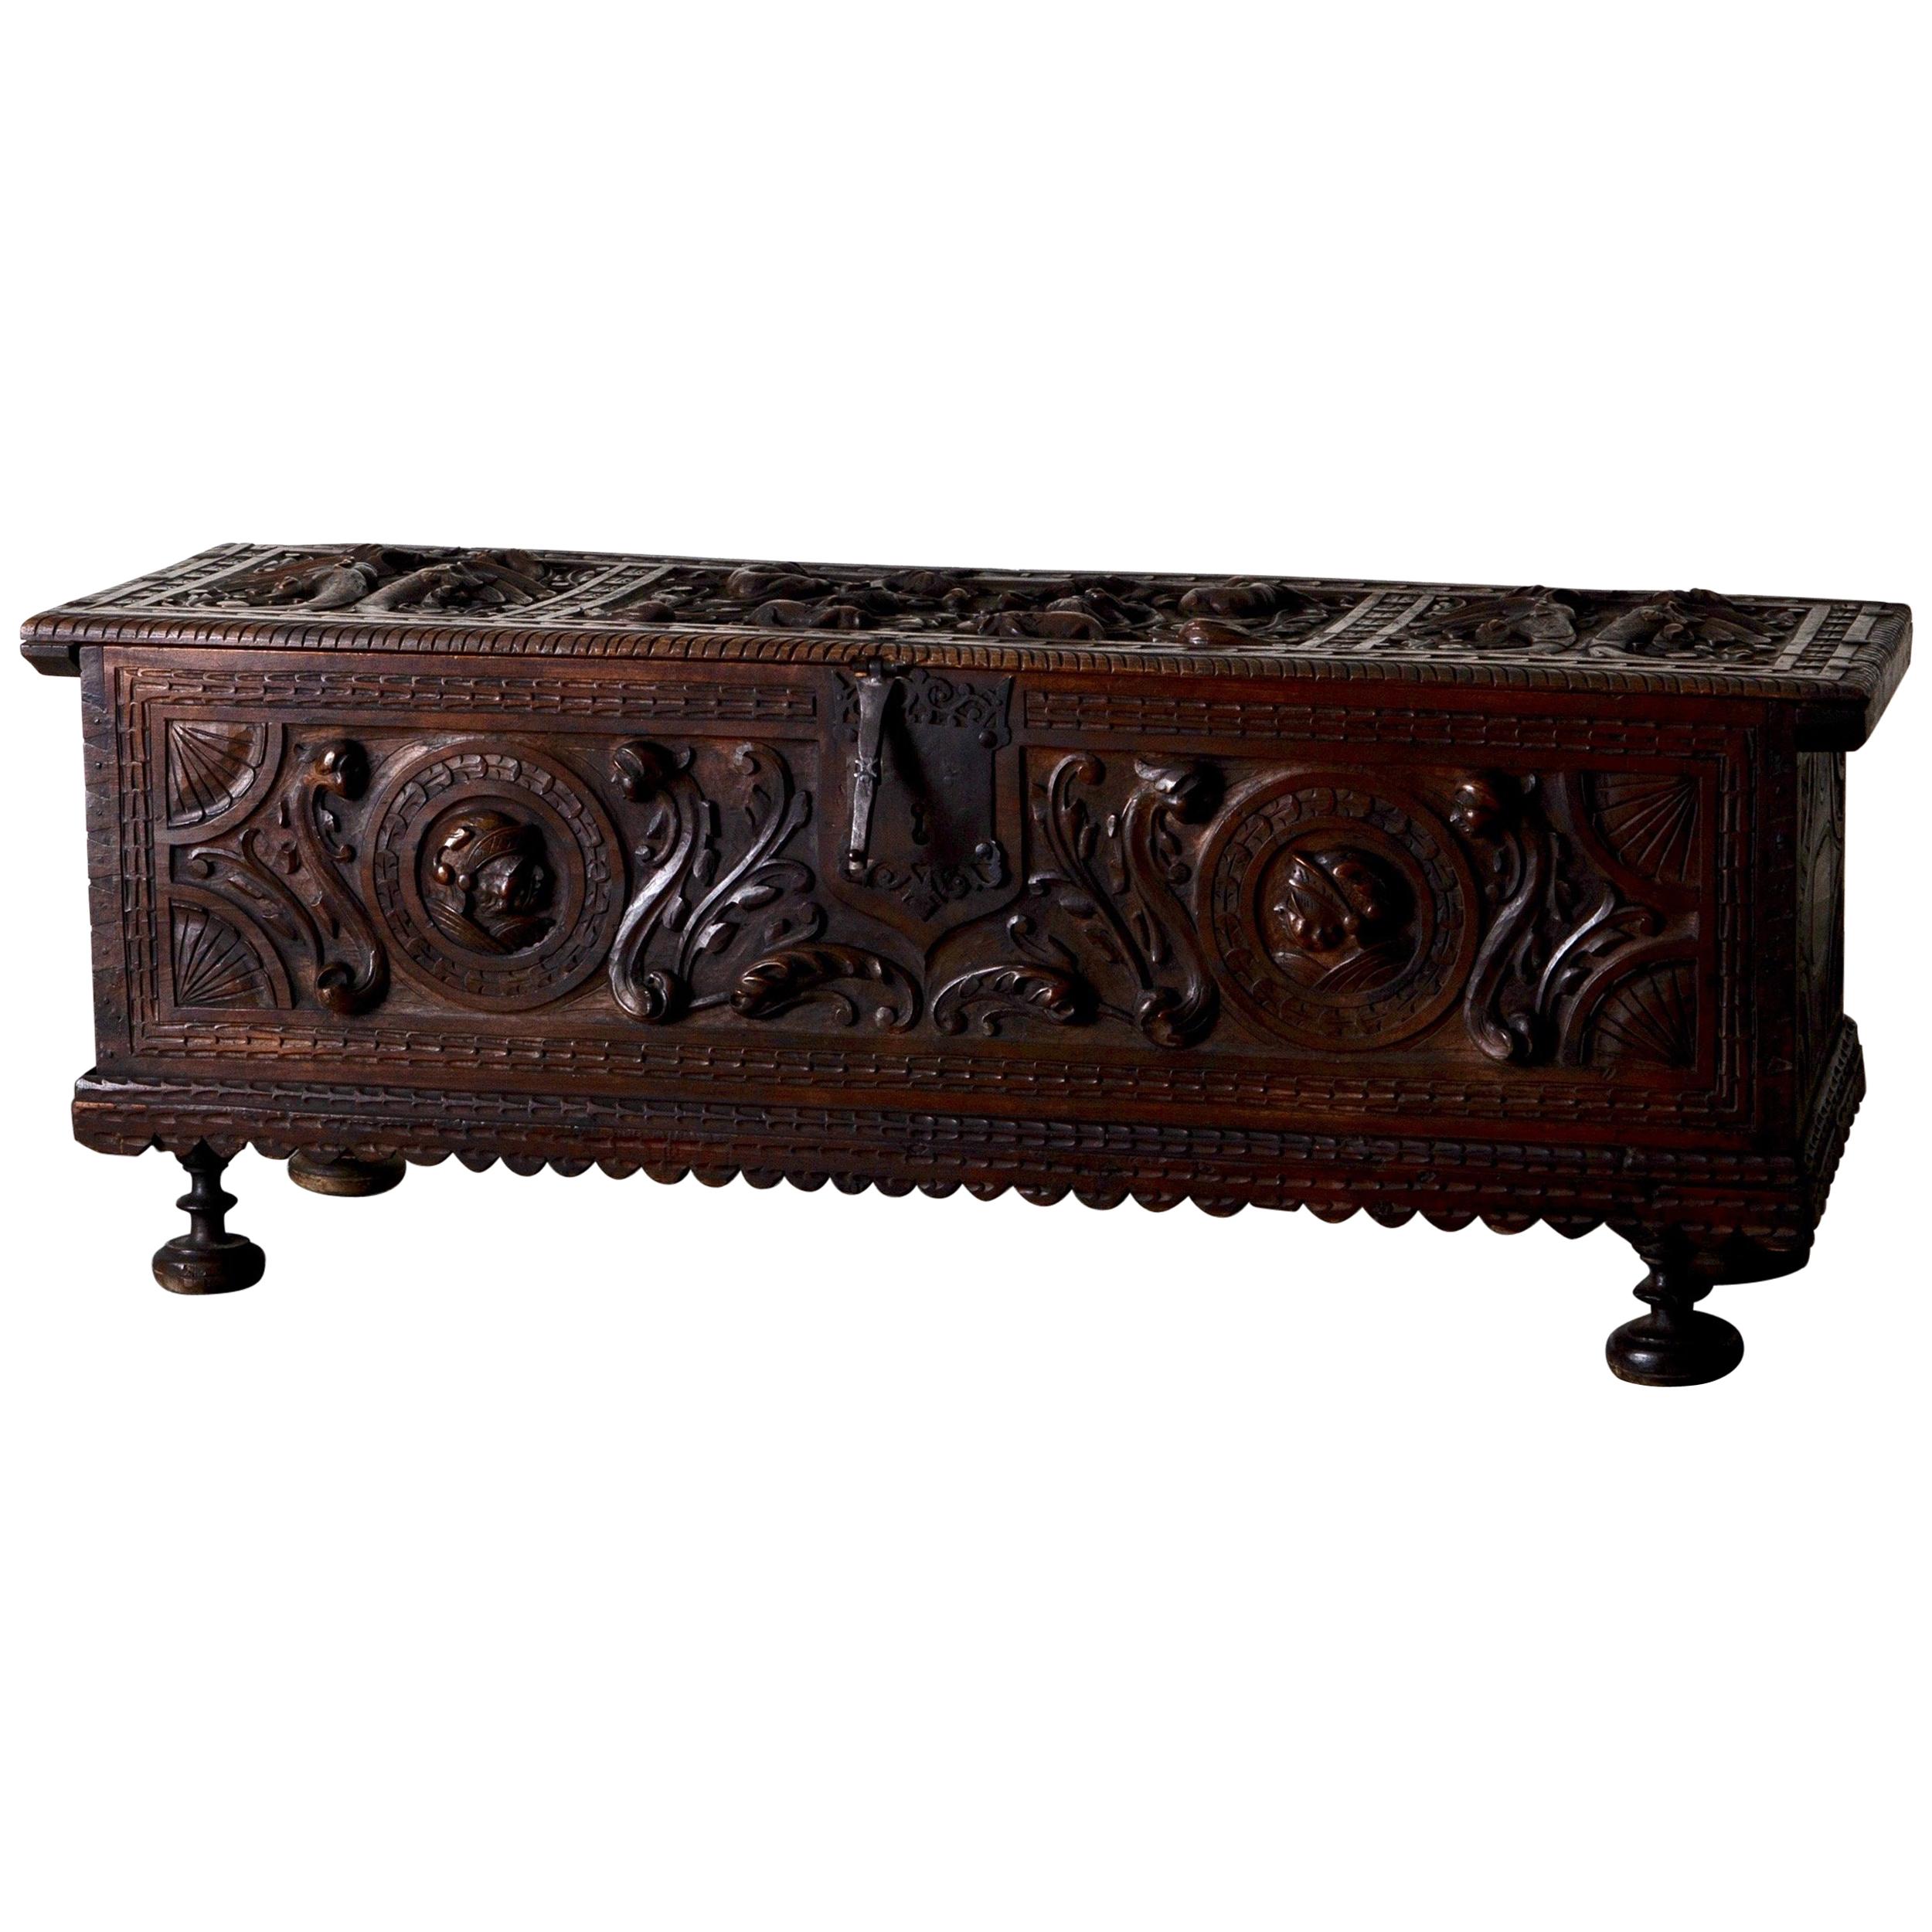 Chest South of Europe Baroque Oak, 18th Century